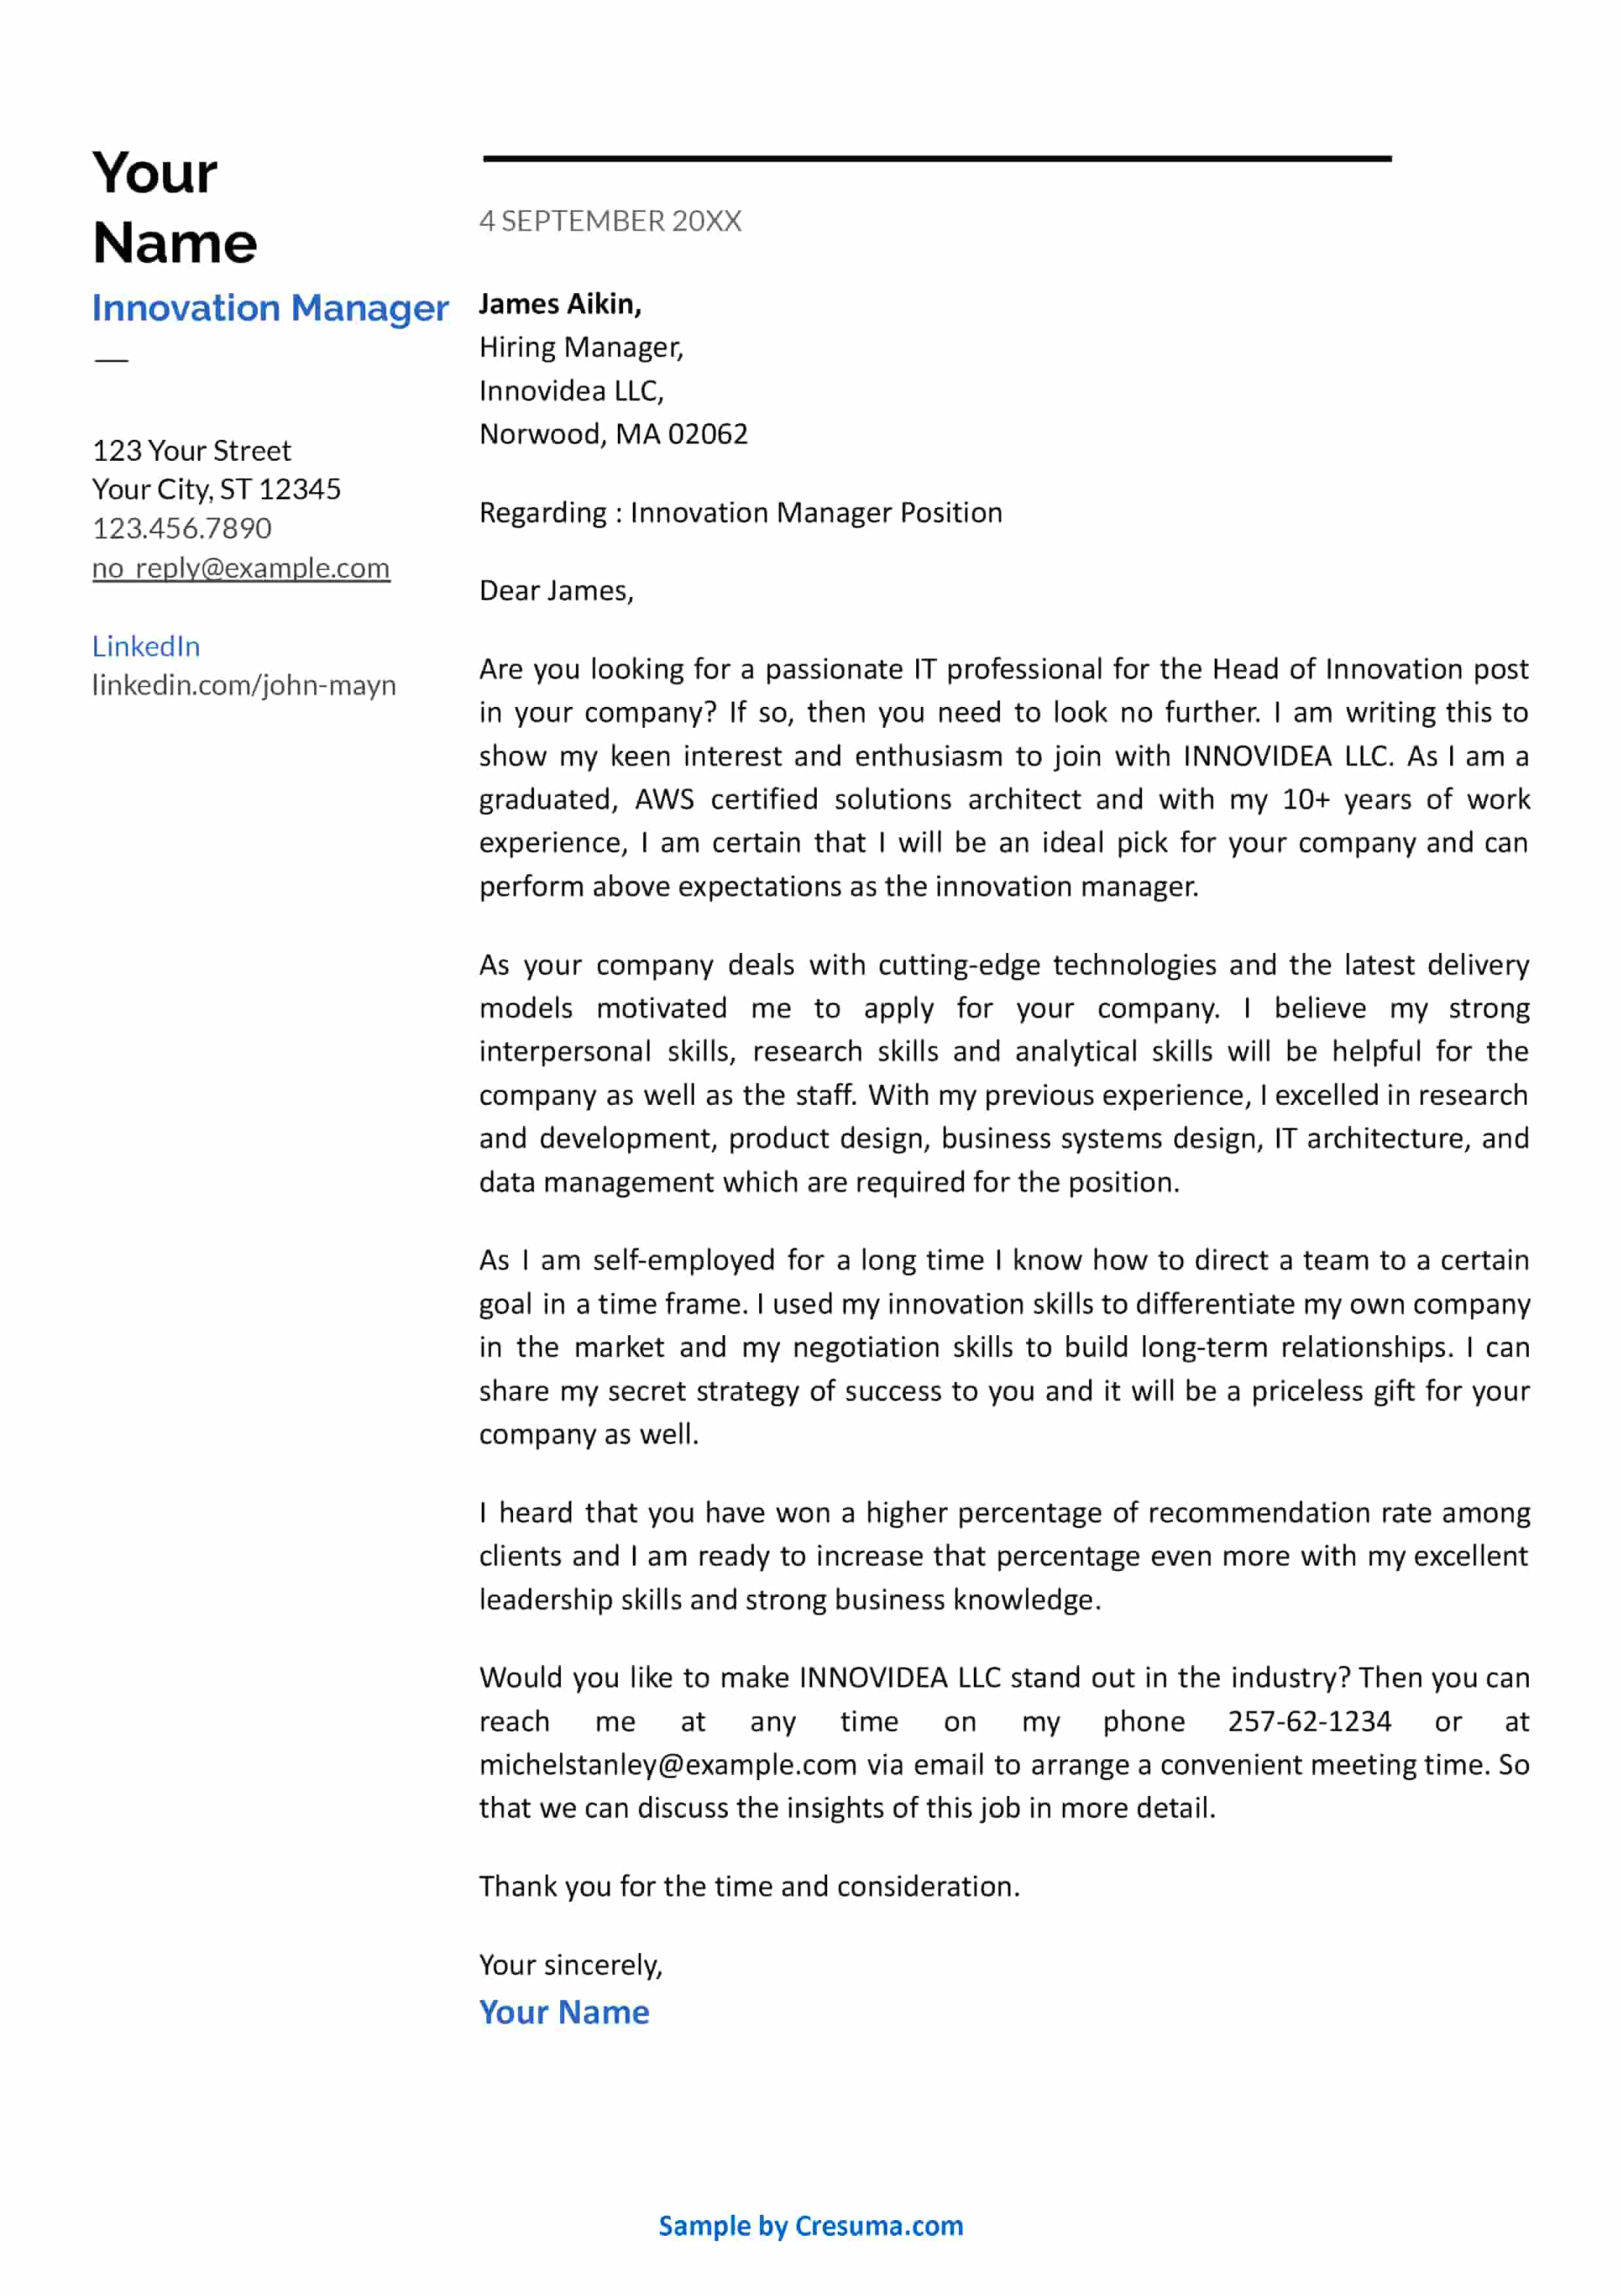 Innovation Manager cover letter example template 5